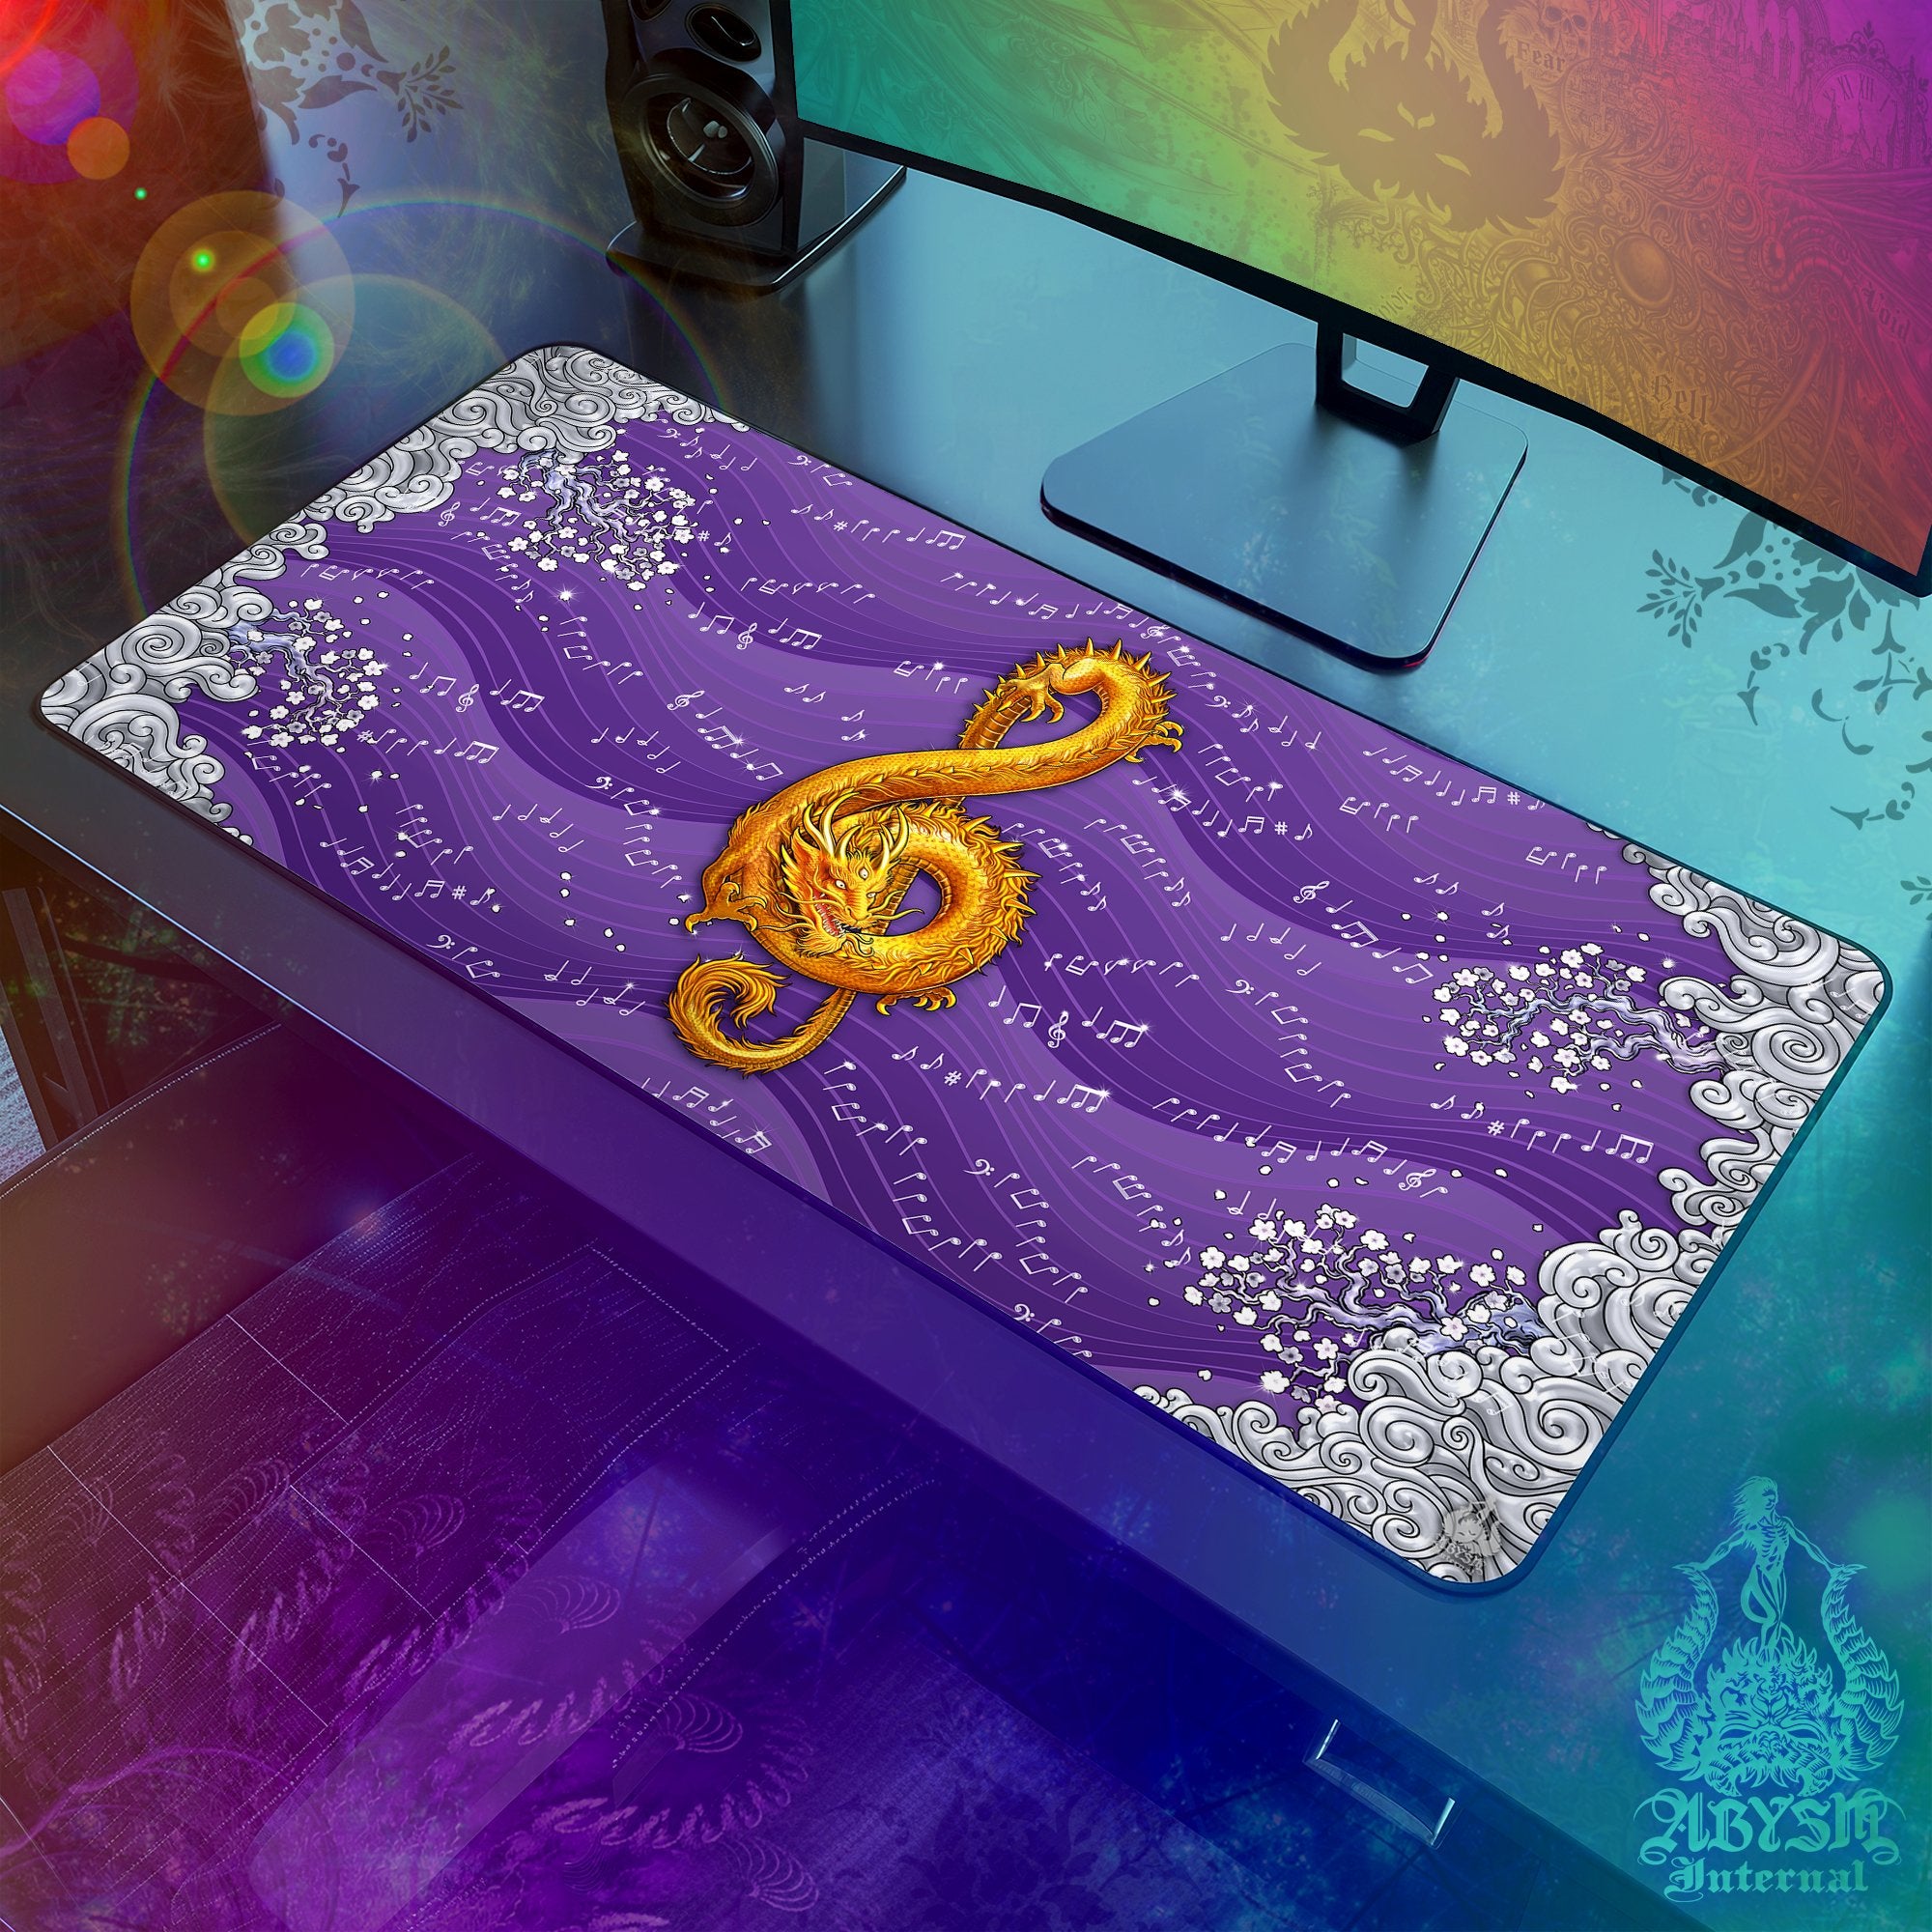 Music Gaming Desk Mat, Dragon Mouse Pad, Asian Table Protector Cover, Chinese Art Workpad, Treble Clef Print - Purple, Gold, Blue, 3 Colors - Abysm Internal